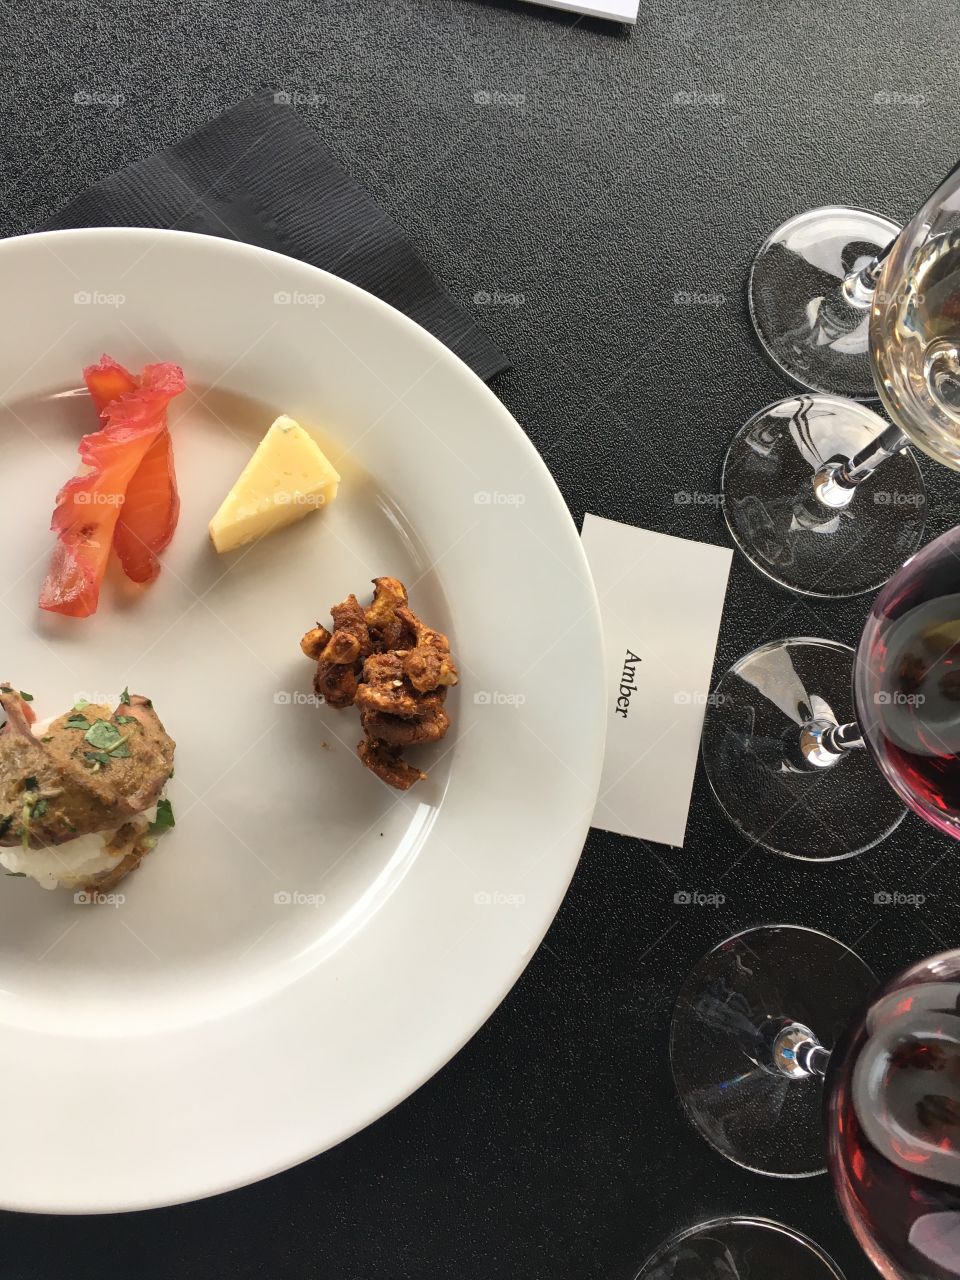 Wine tasting at 13th street winery. Cured salmon, beef strip on rice with Japanese condiment, cashews and pecans roasted with curry, brown sugar and mustard seed. Starting with sparking wine, Pinot Gris, merlot, Pinot noir. 